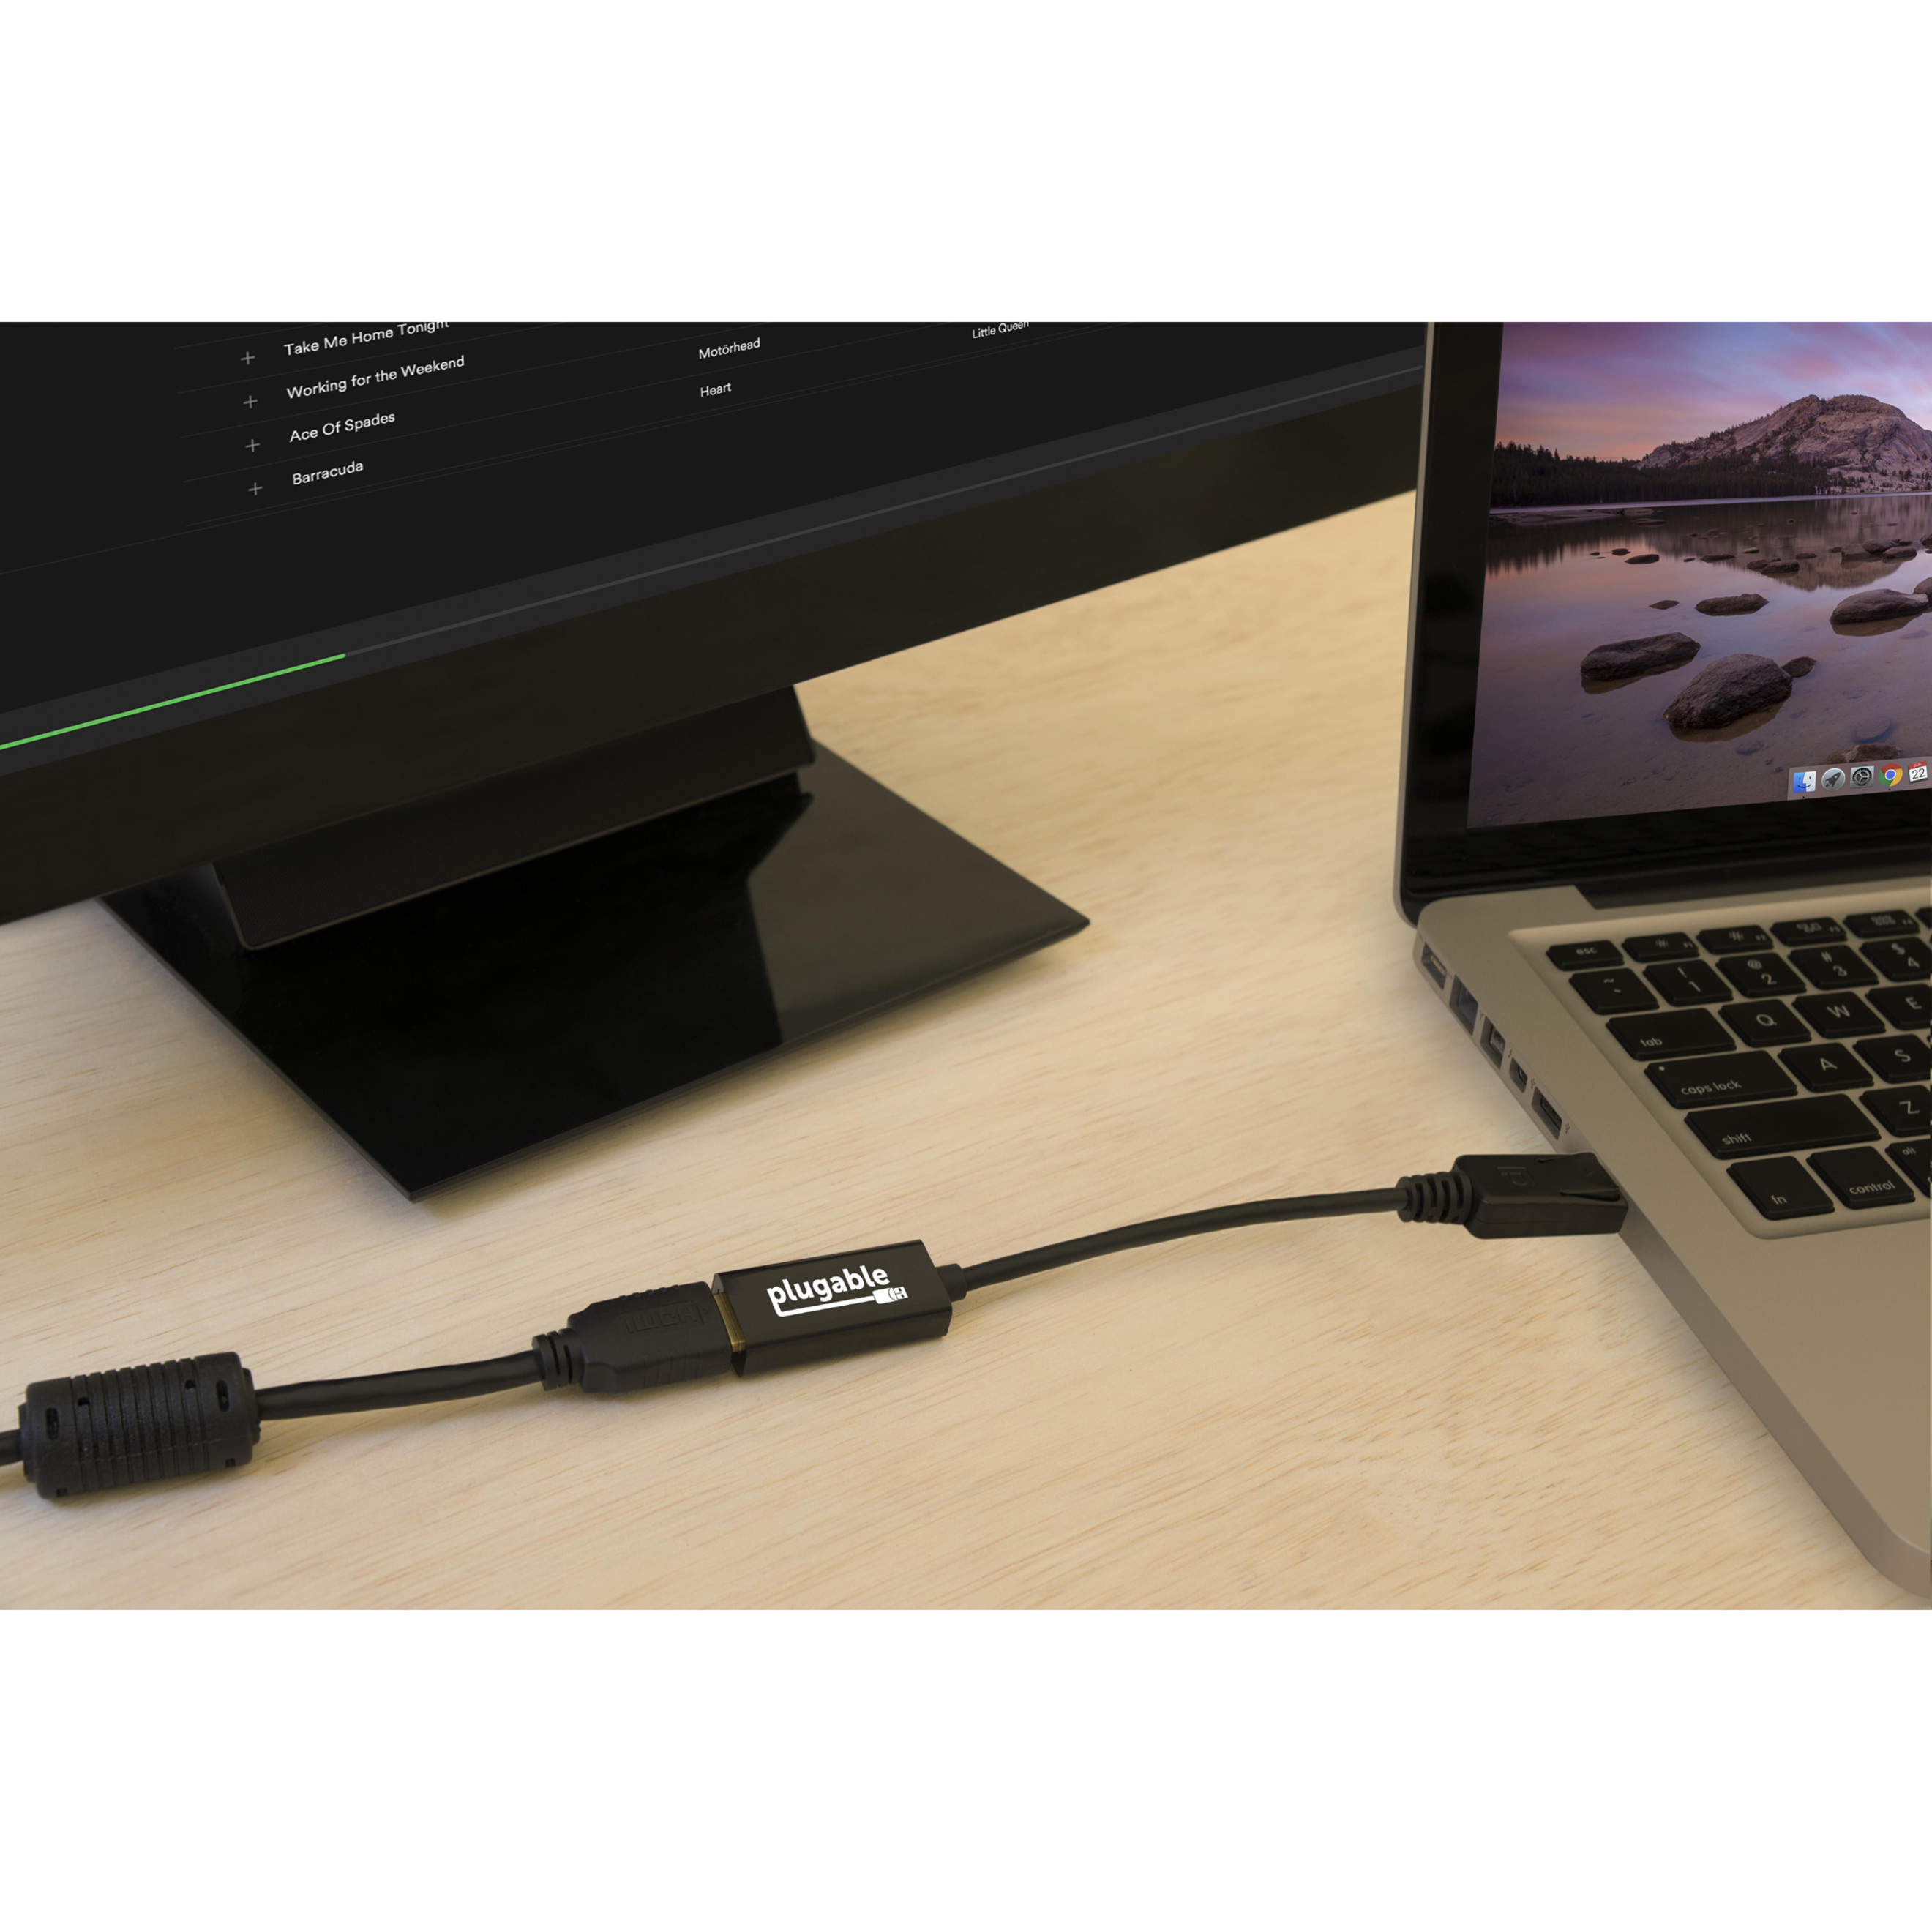 Plugable DisplayPort to HDMI Passive Adapter (Supports Windows and Linux Systems and Displays up to 4K UHD 3840x2160@30Hz) - image 2 of 5